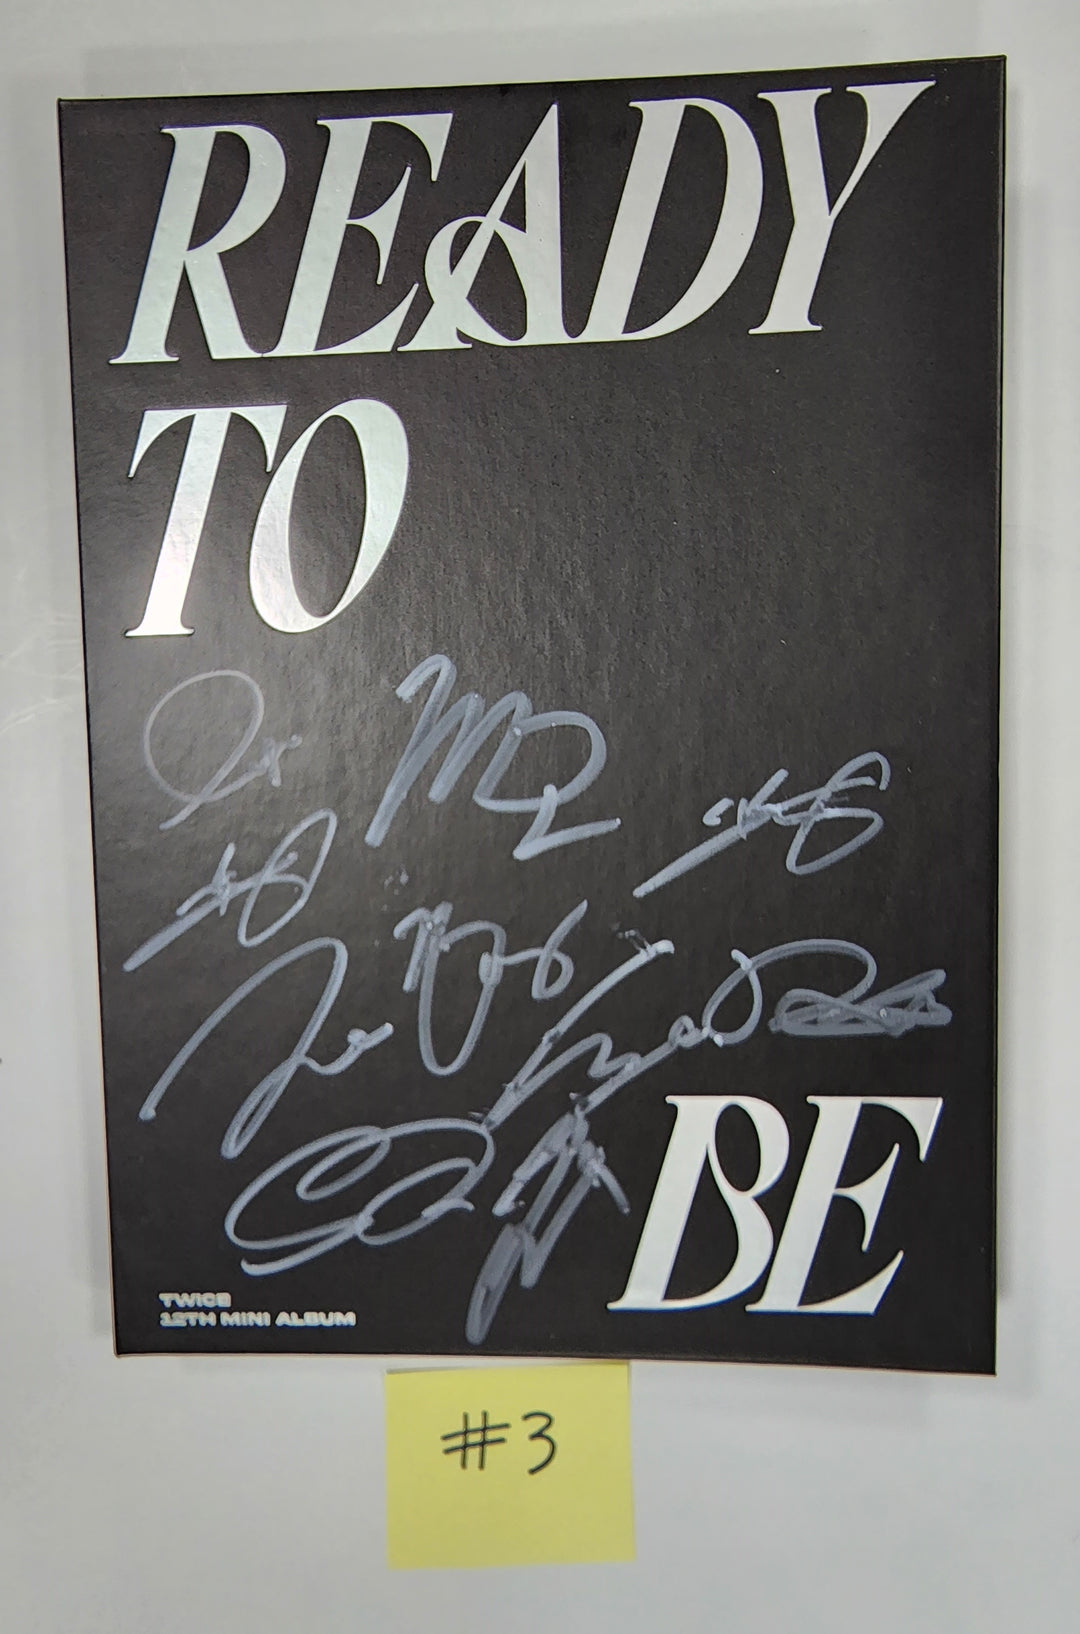 Twice "READY TO BE" - Hand Autographed(Signed) Promo Album (Restocked 3/24)